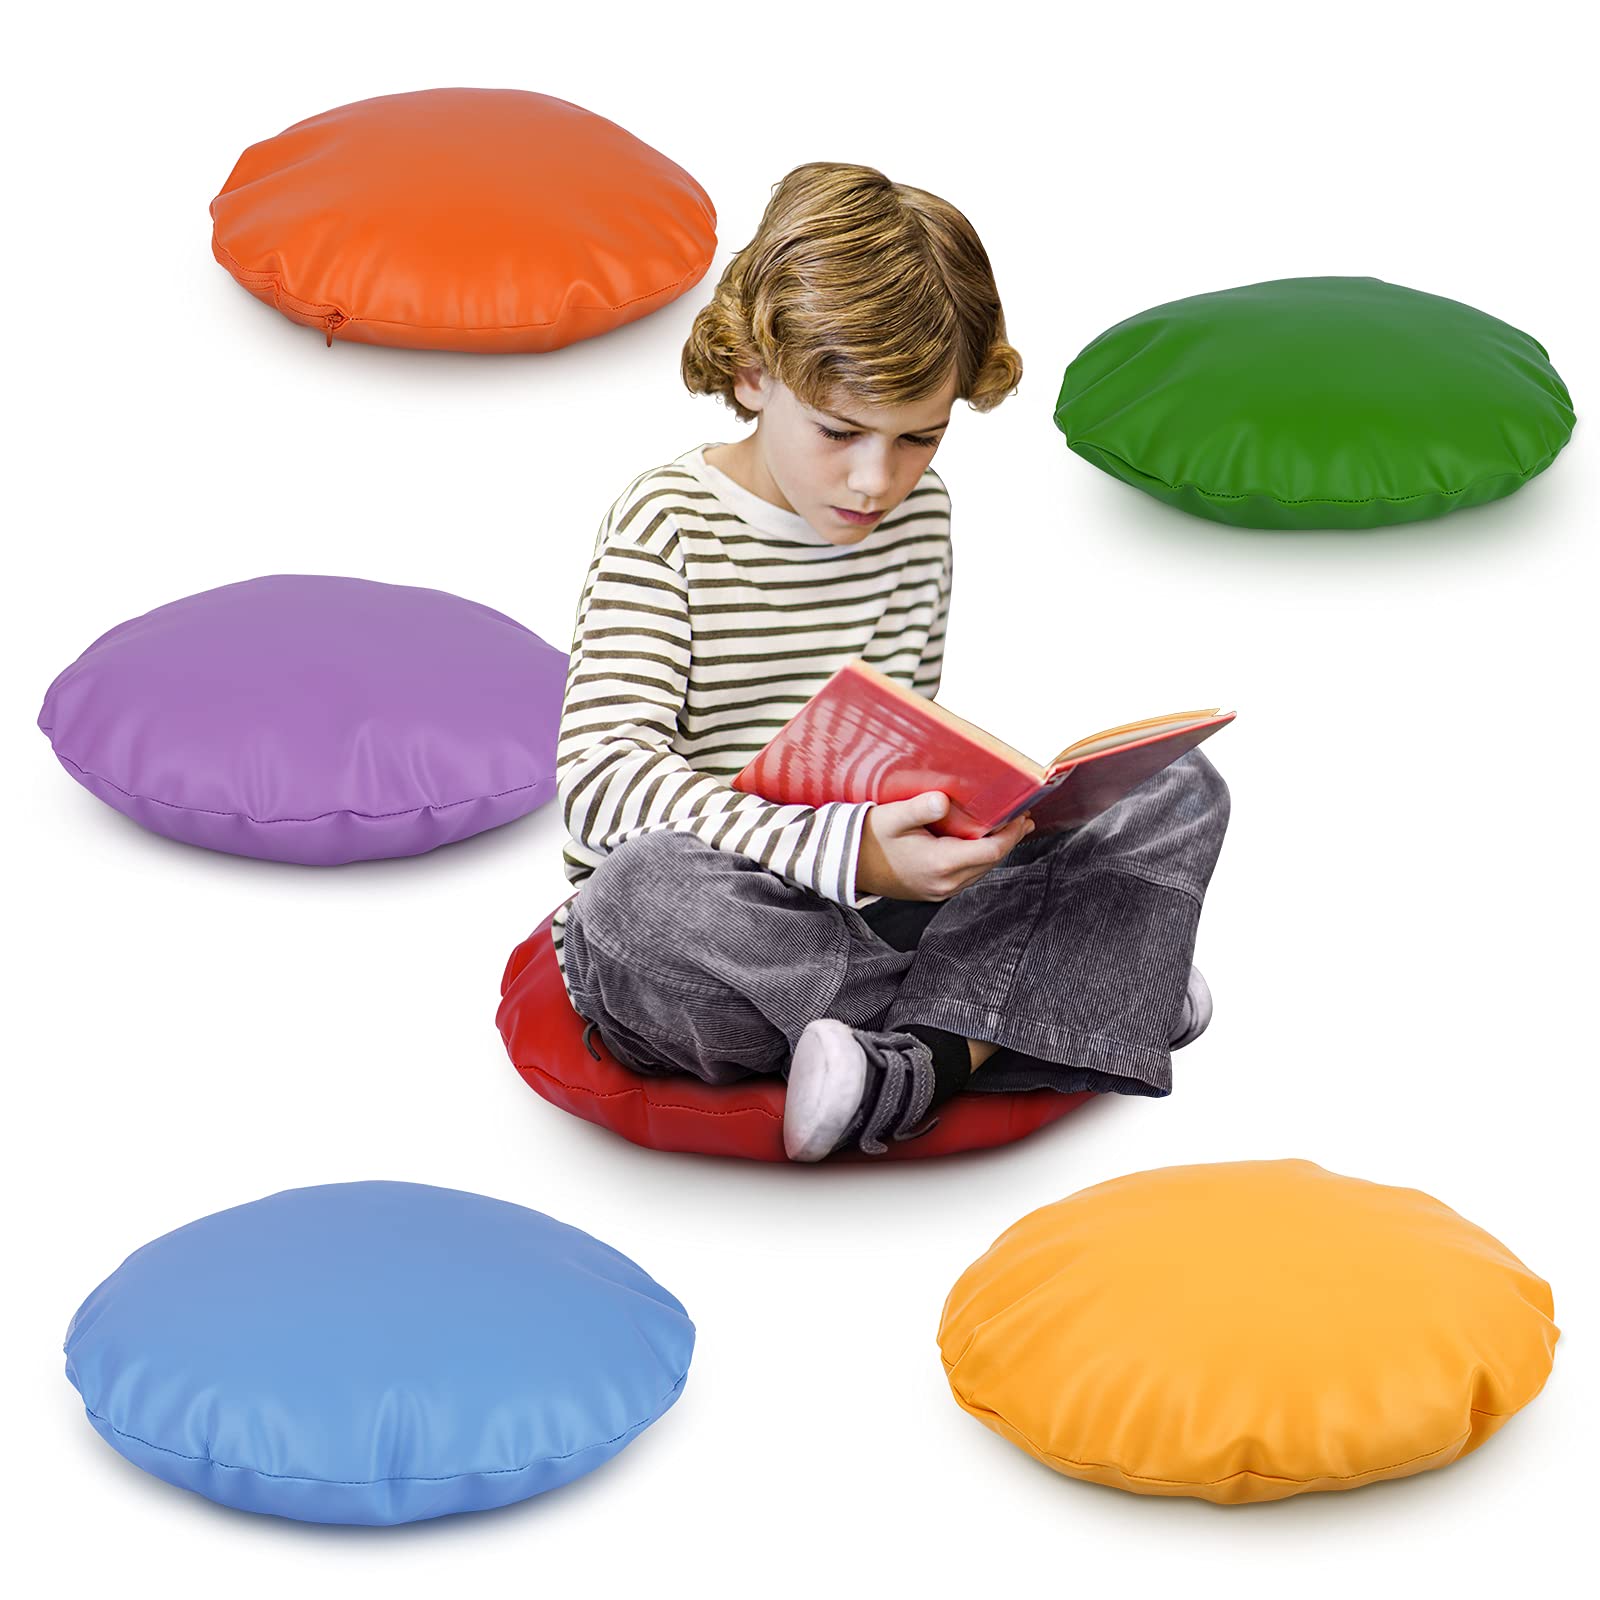 GAMENOTE Round Floor Cushions for Classroom - Comfy Memory Flexible Seating Floor Seat Cushion for Kids Distance Learning (6 Pieces)